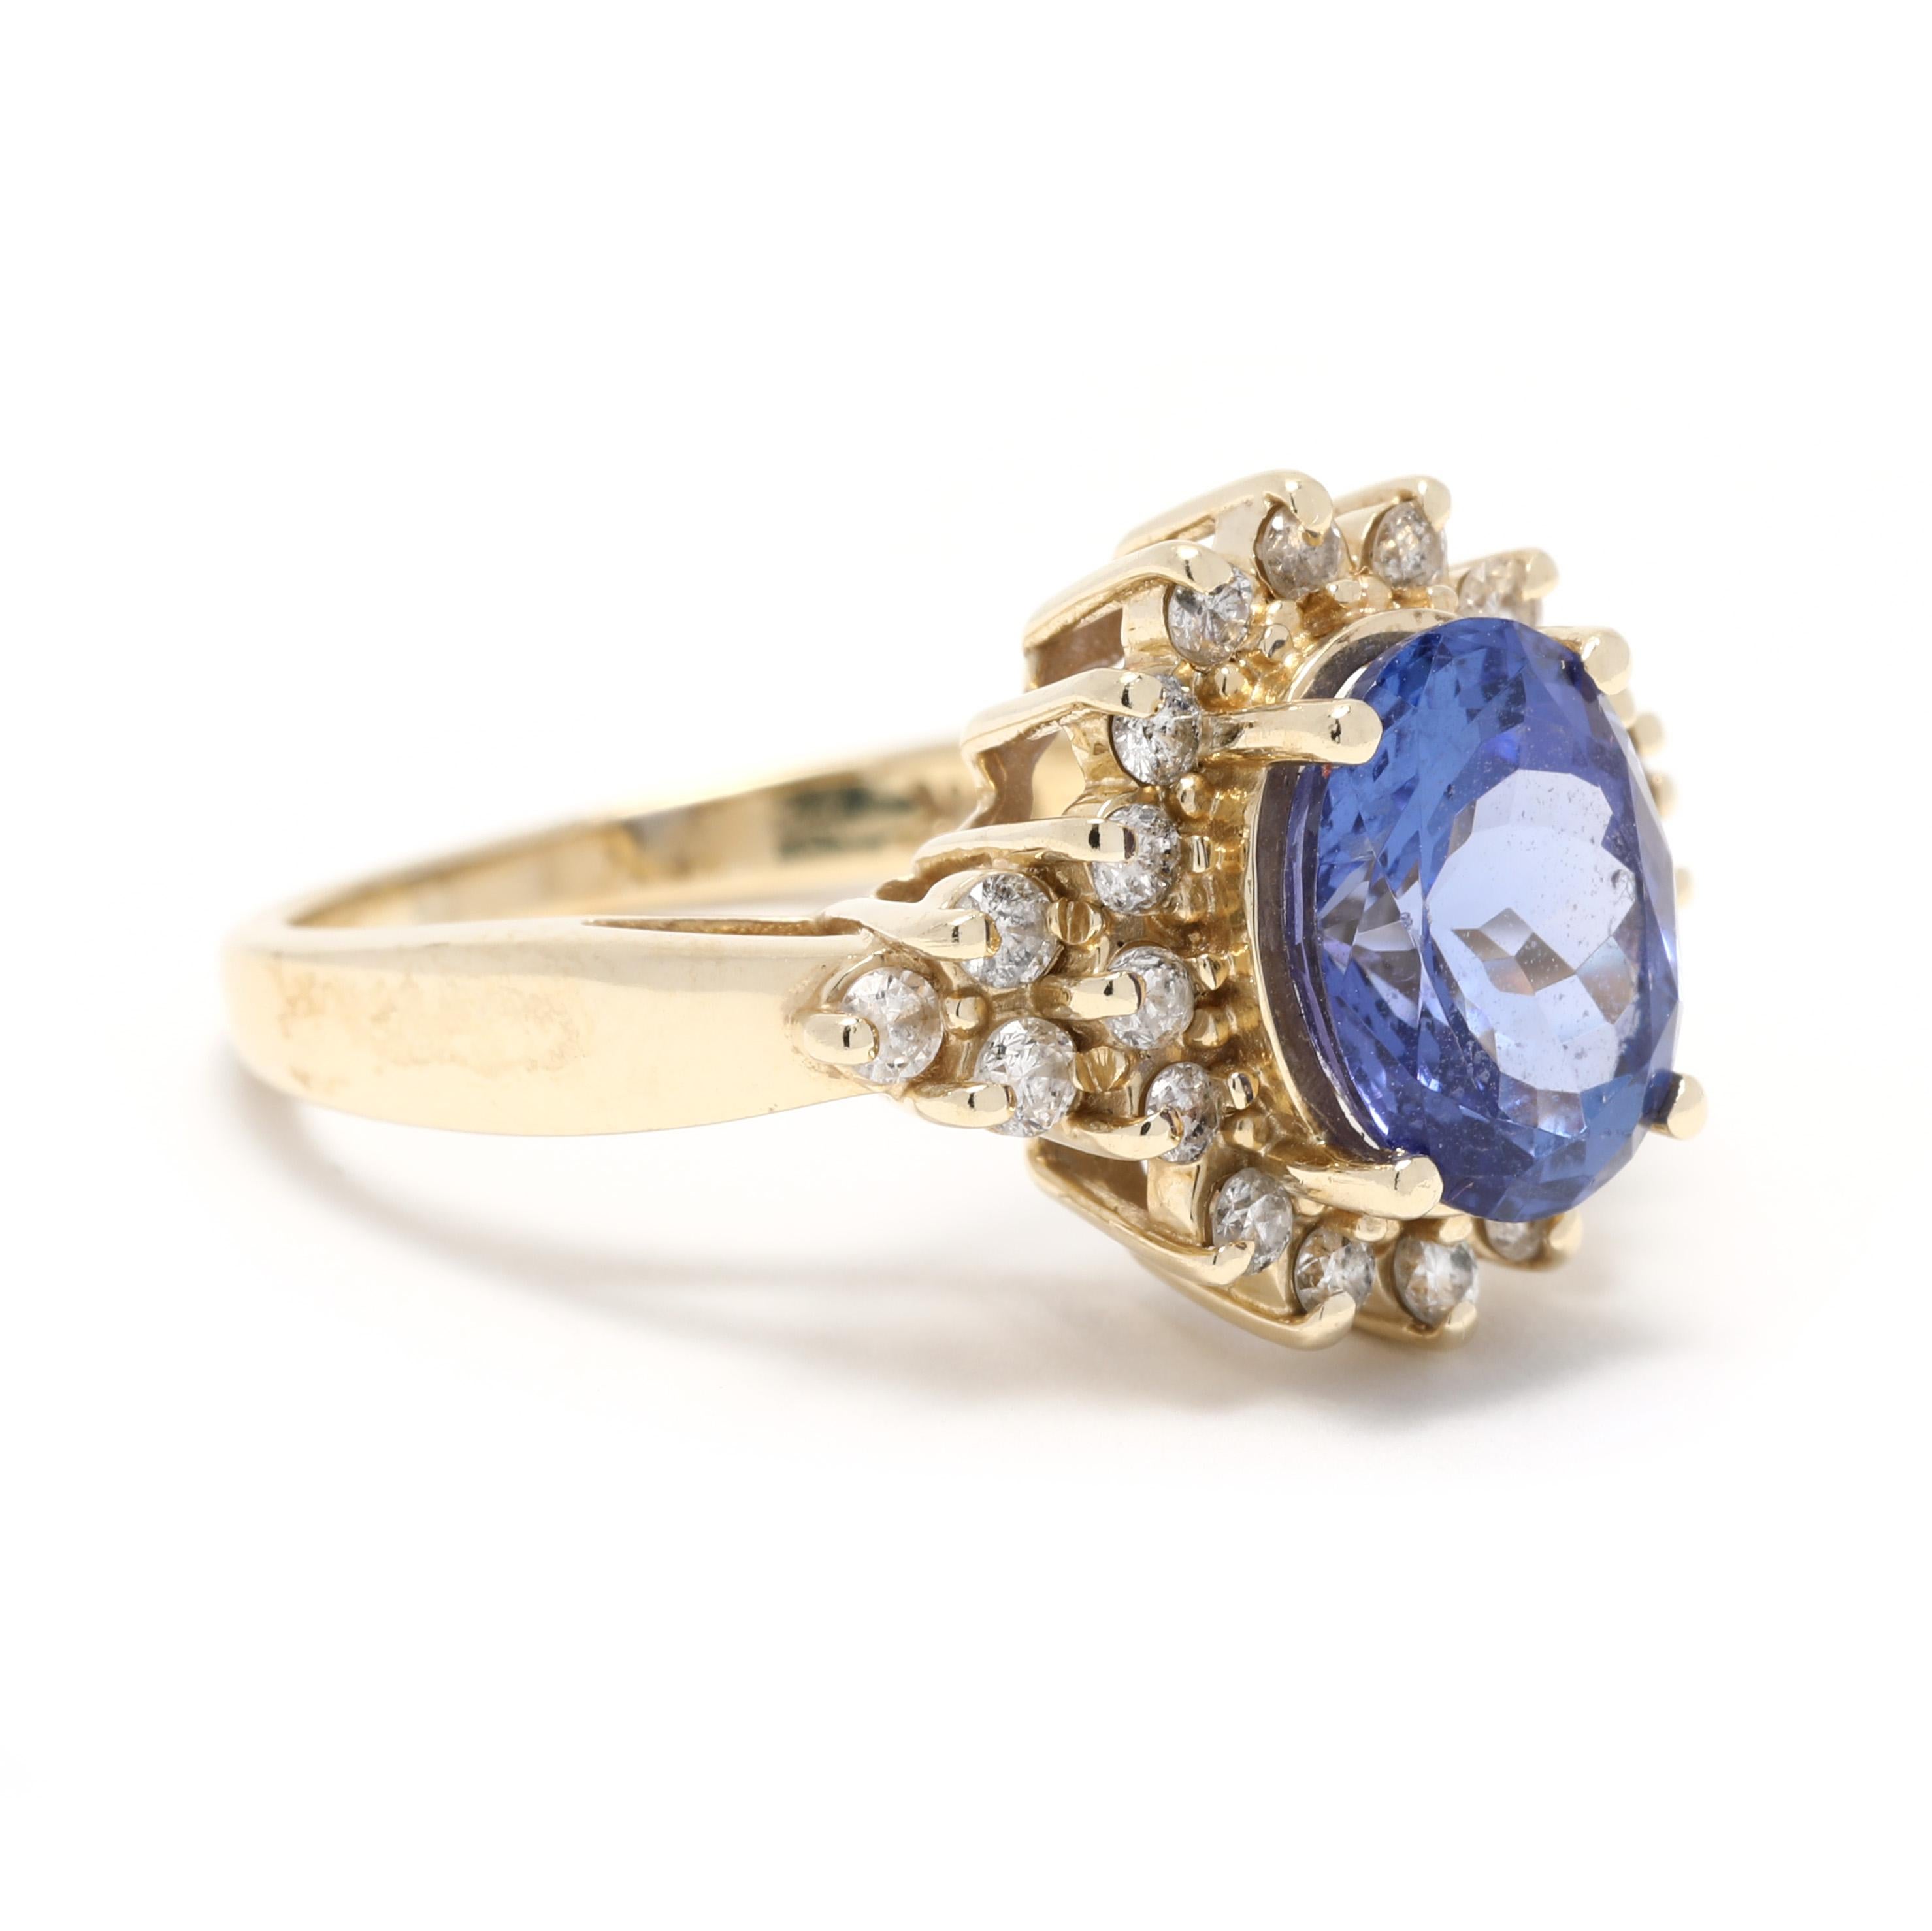 This stunning 2.88ctw Tanzanite and Diamond Halo Cocktail Ring is perfect for your special day! Crafted in 14K Yellow Gold, this ring features a stunning 2.5ct Natural Tanzanite center stone accented with a halo of genuine round diamonds. The ring